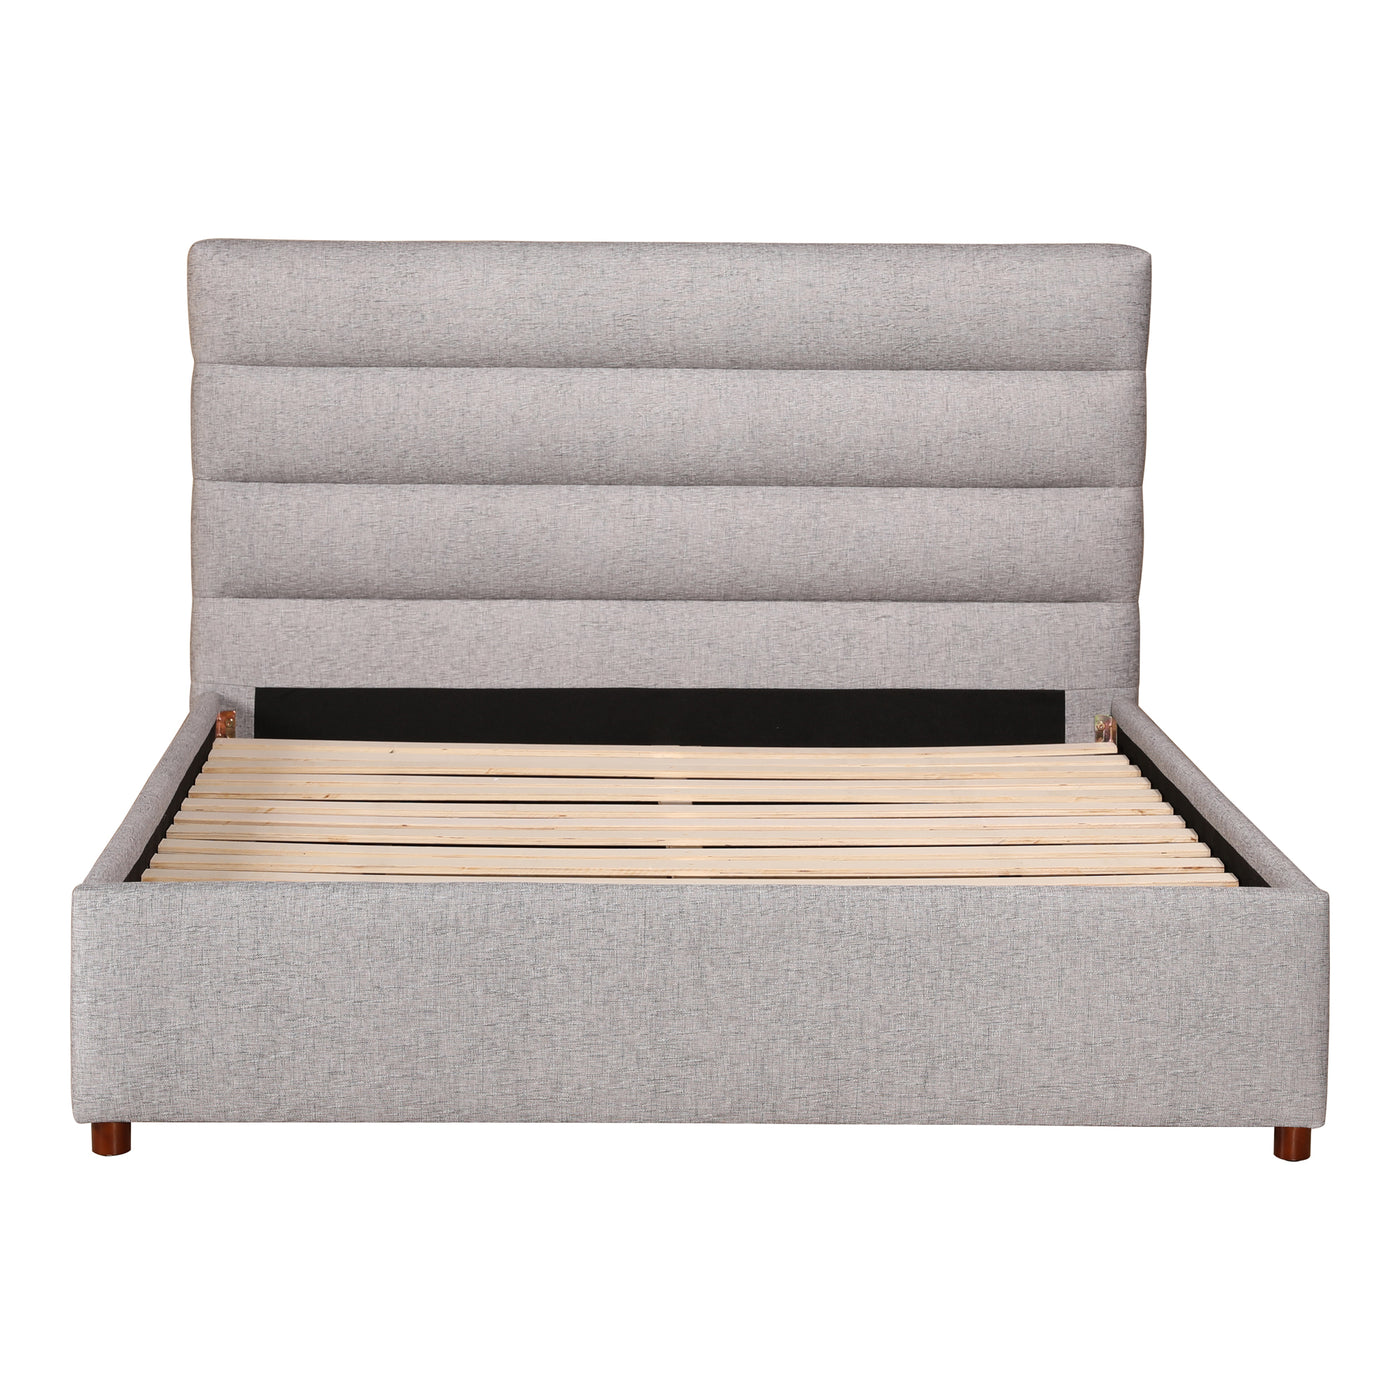 Modern and minimal. The Takio bed is softly upholstered in light grey polyester fabric for a soothing feel before you drif...